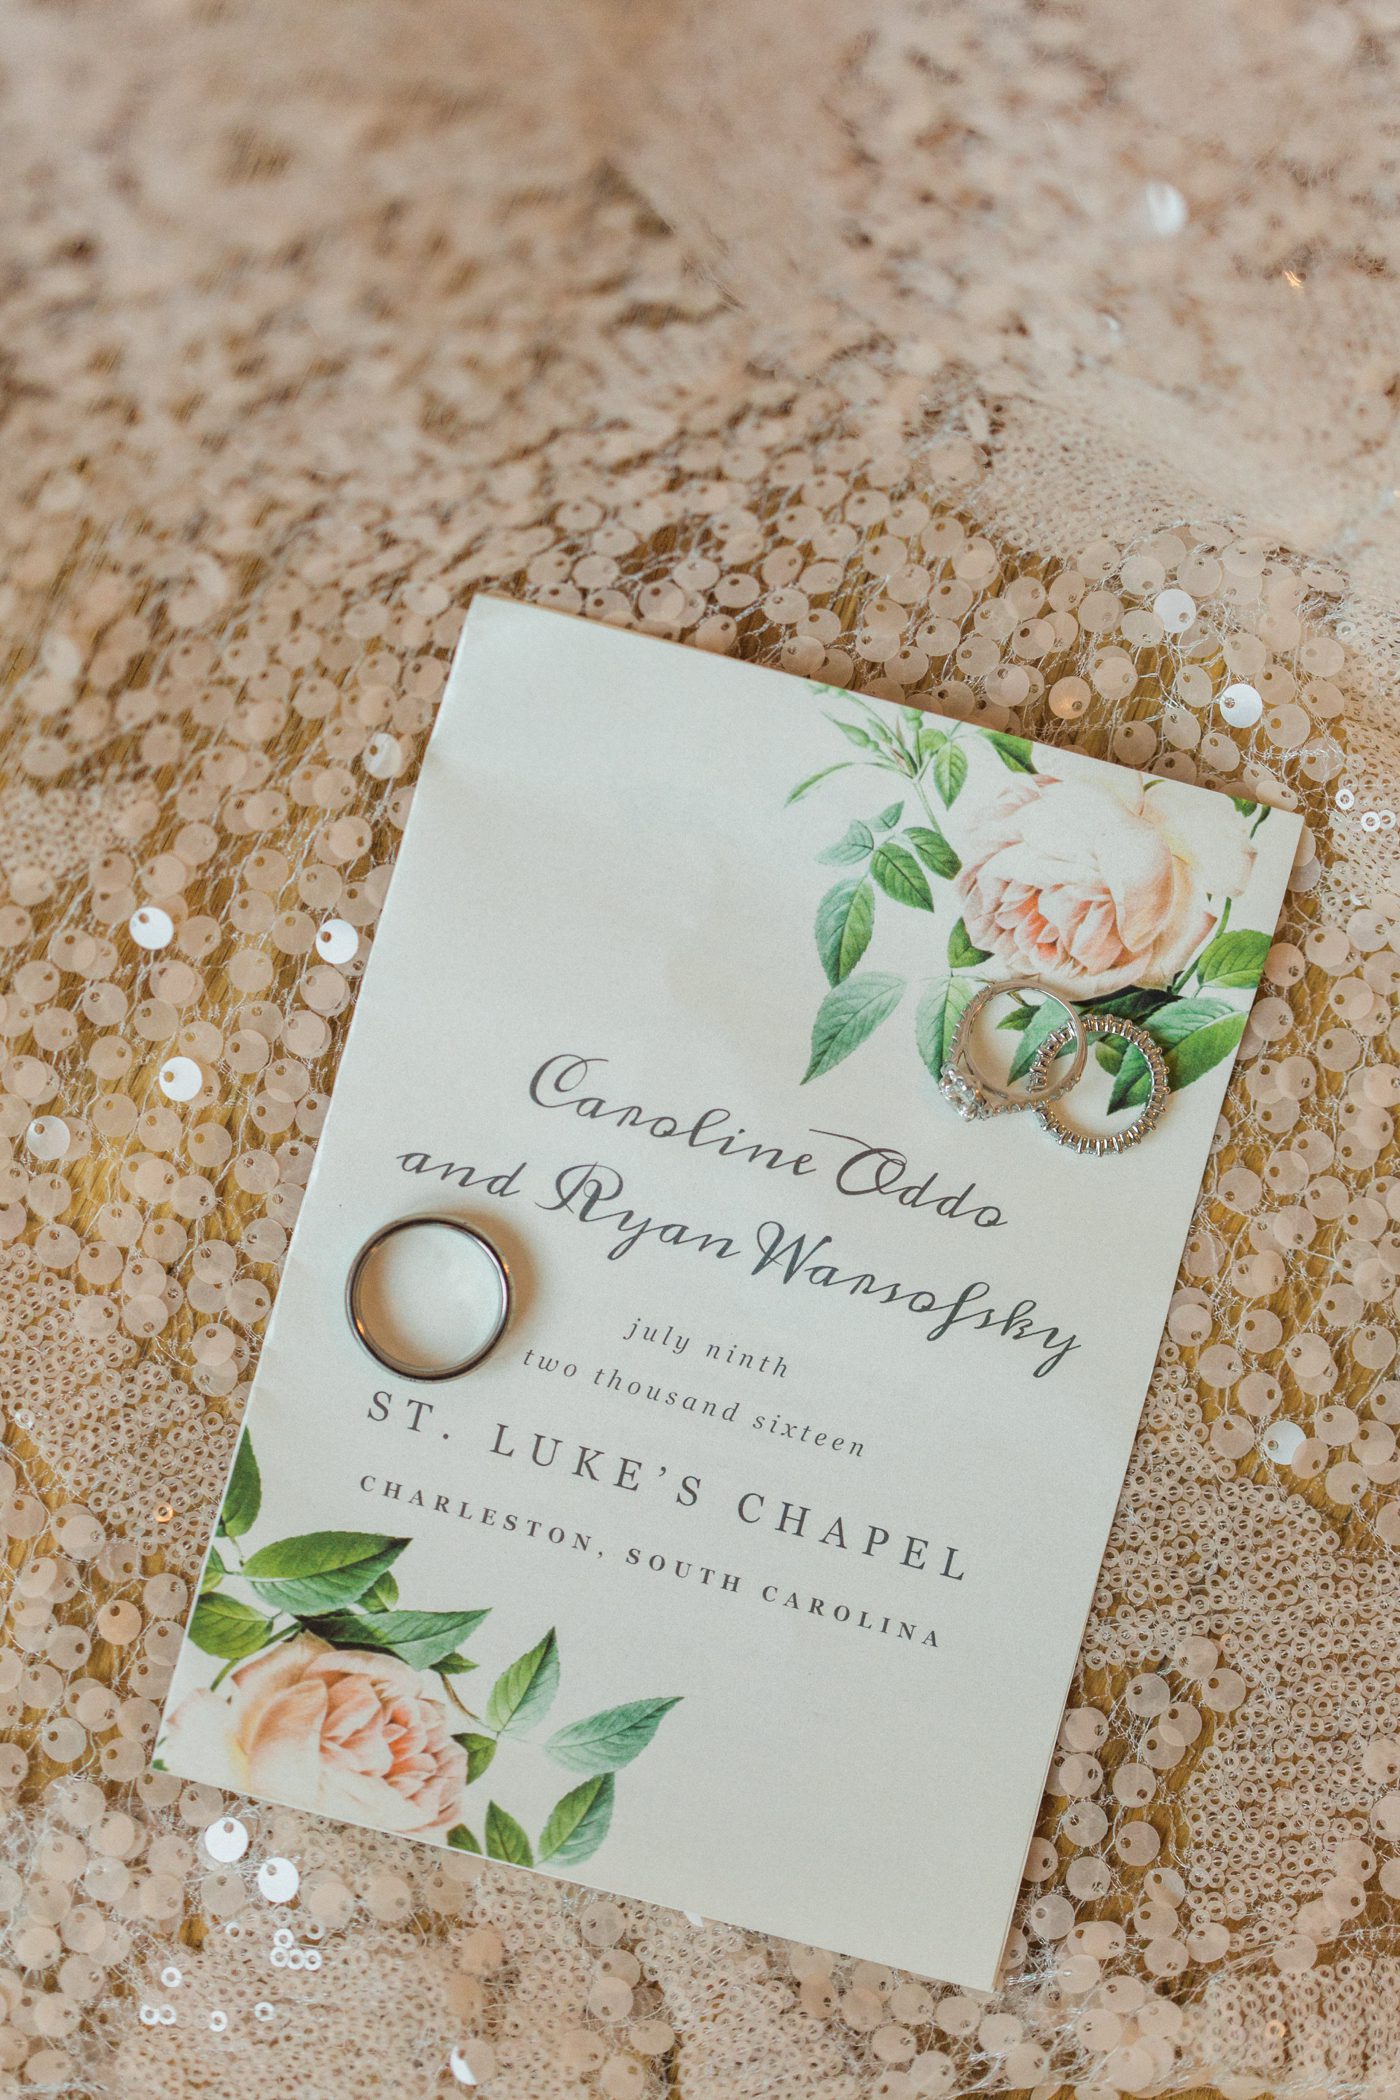 Beautiful floral wedding invitation with wedding rings and blush sequin tablecloth for a southern wedding. Photo by Catherine Ann Photography